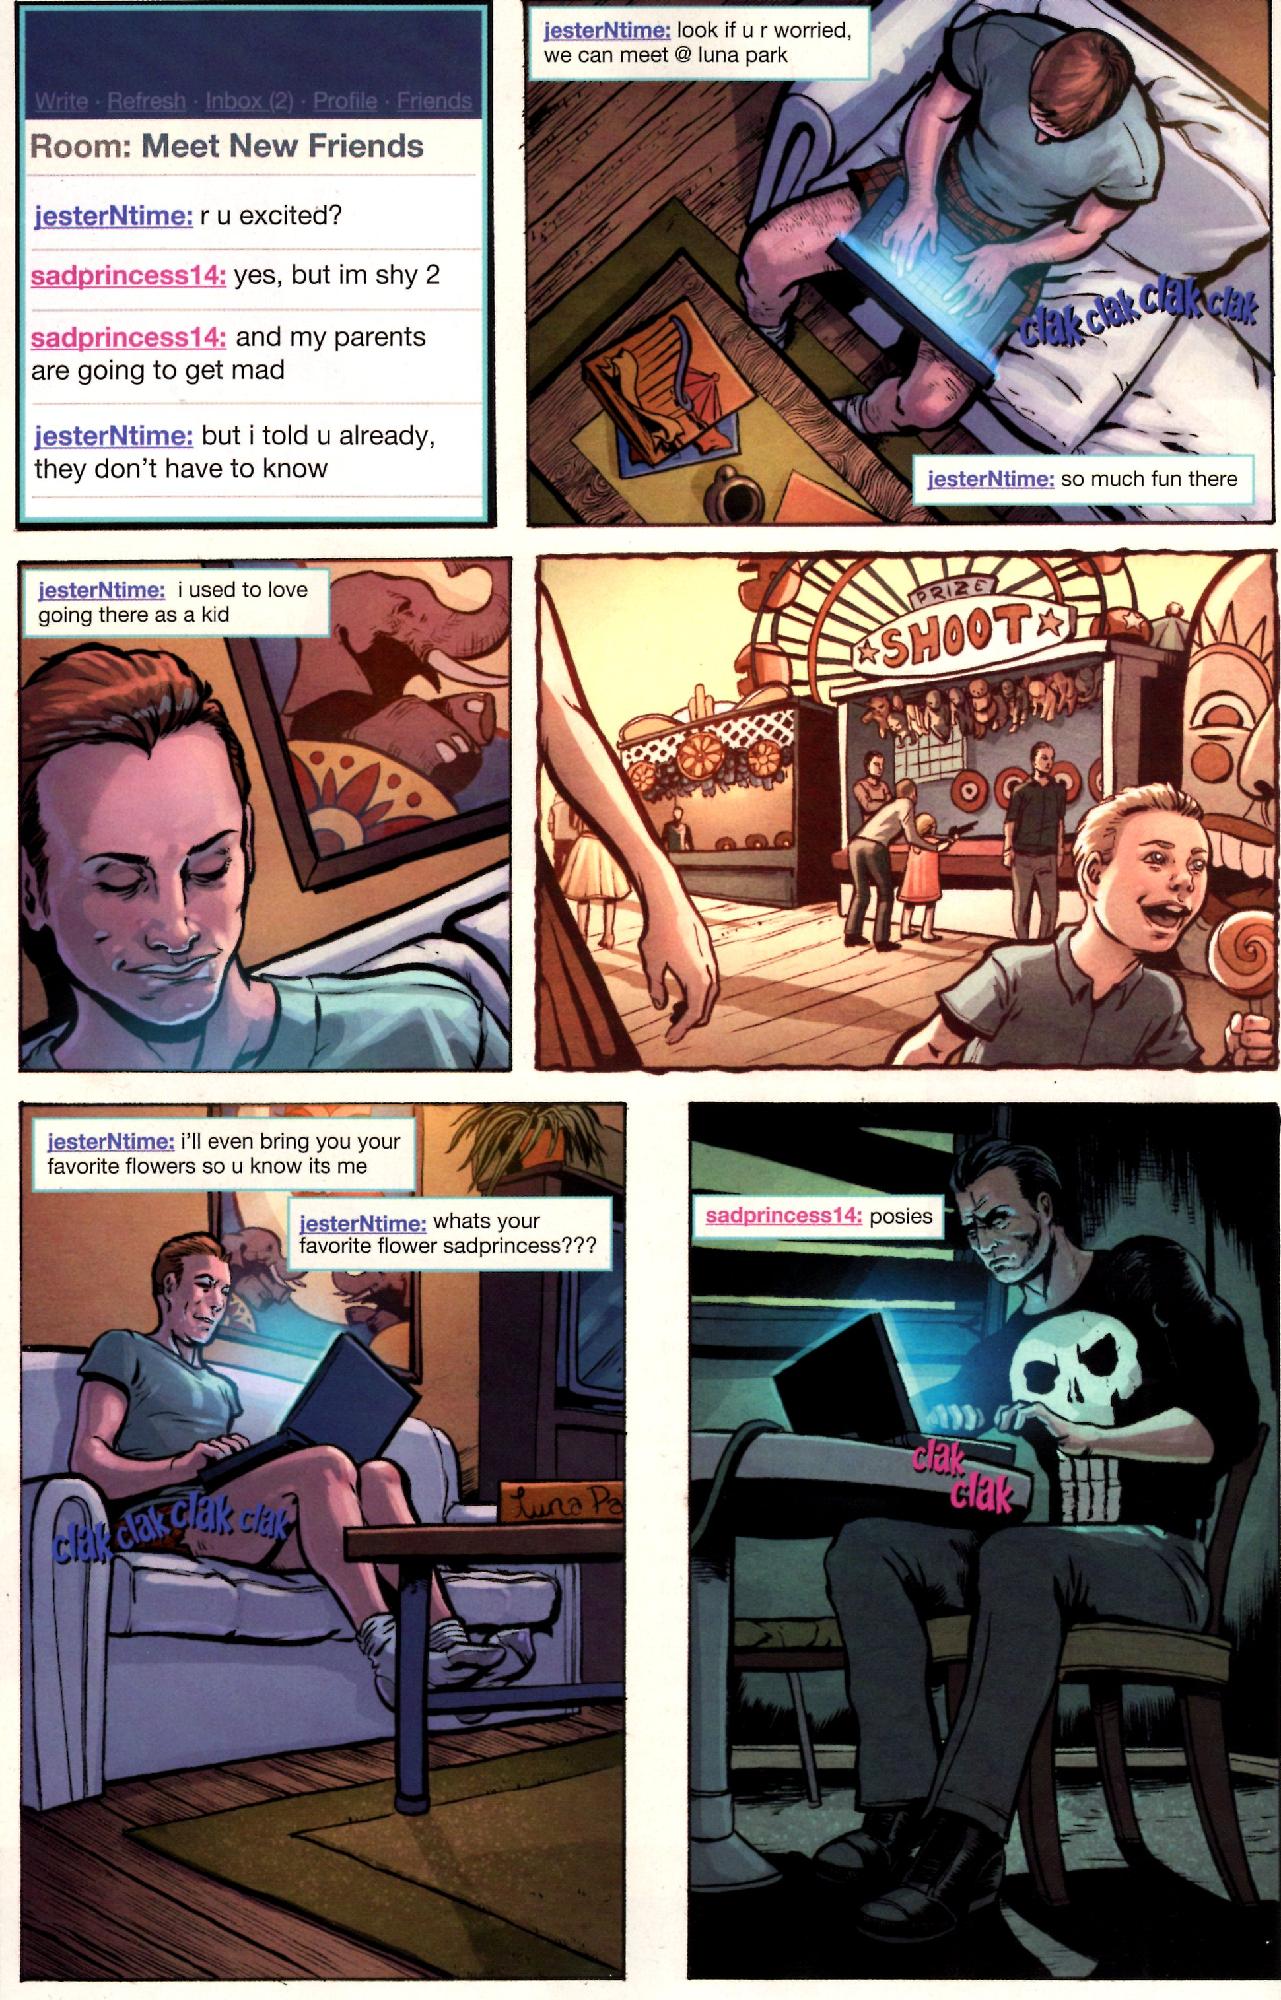 The Punisher is masquerading as a young girl online so he can lure sex…